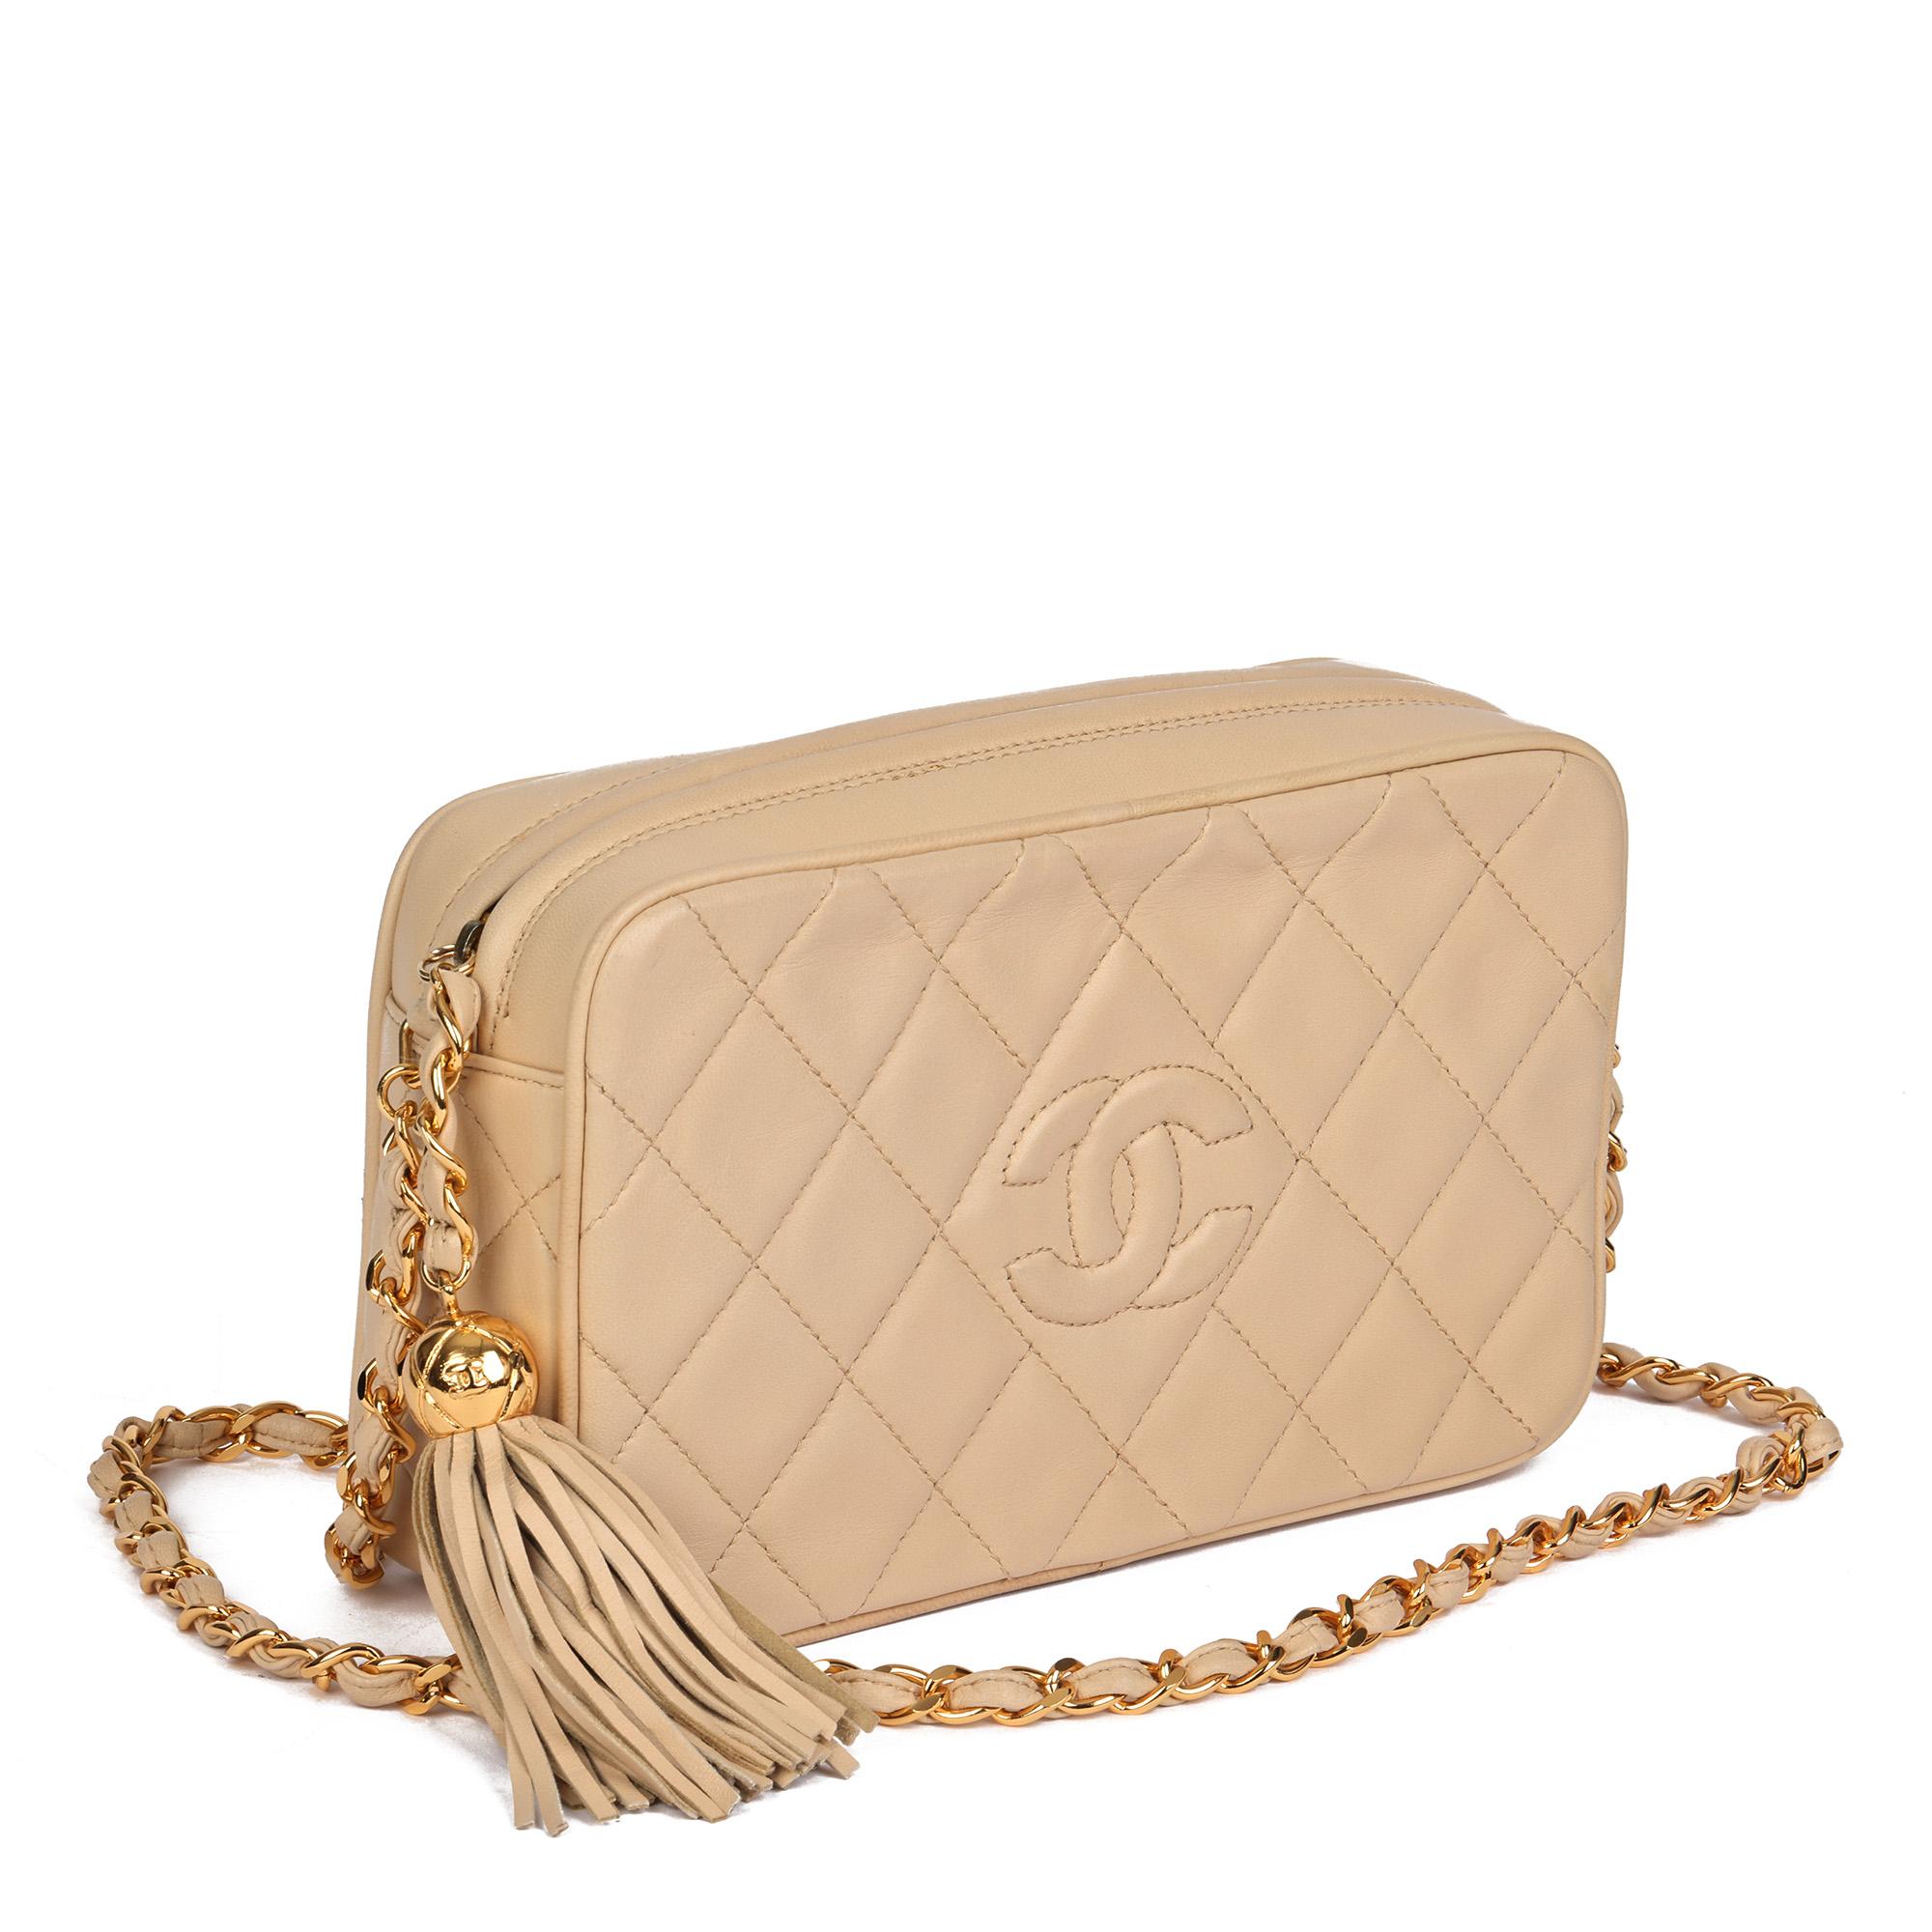 CHANEL
Beige Quilted Lambskin Vintage Small Fringe Timeless Camera Bag

Serial Number: 3174073
Age (Circa): 1994
Accompanied By: Authenticity Card
Authenticity Details: Authenticity Card, Serial Sticker (Made in Italy)
Gender: Ladies
Type: Shoulder,